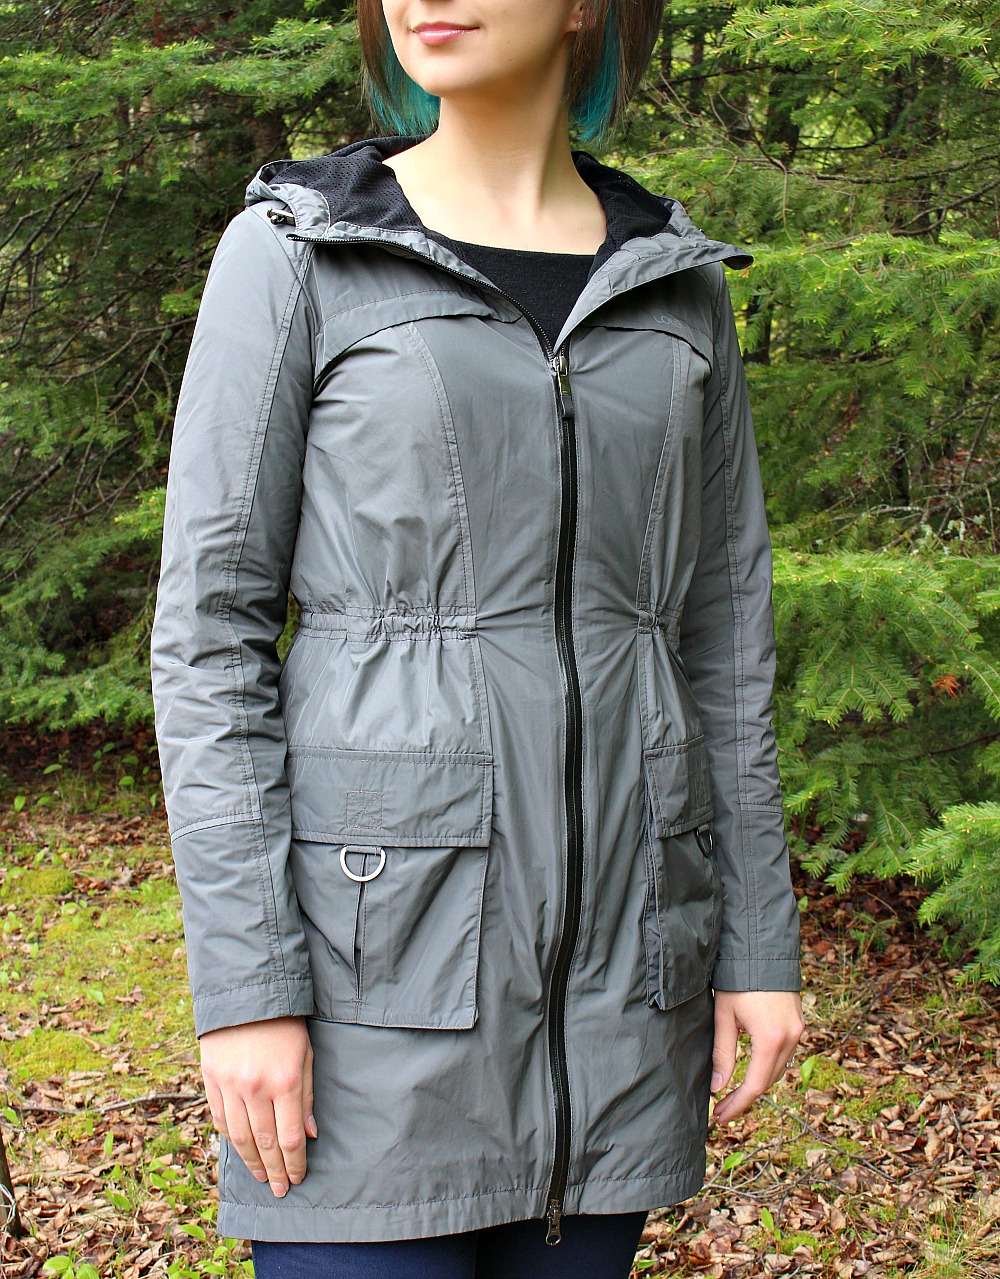 Finding a Modern, Stylish Spring Rain Jacket for Curvy Hips